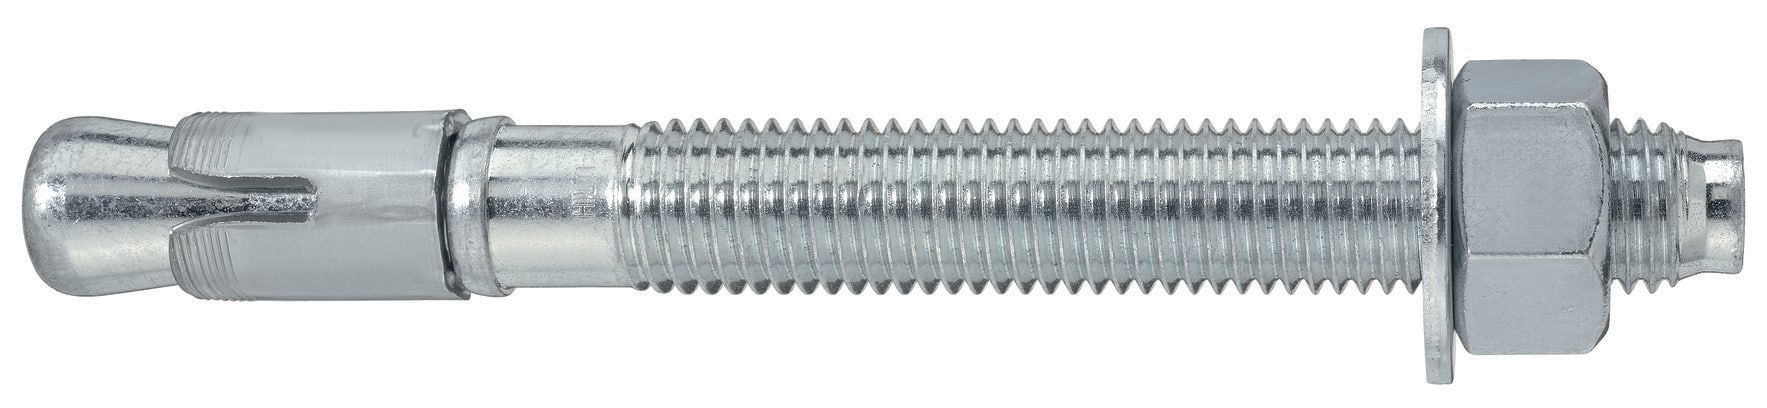 Carbon Steel Countersunk Hilti KWIK Bolt 3 Expansion Anchor KB3 1/4 x 2-286037 Box of 100 